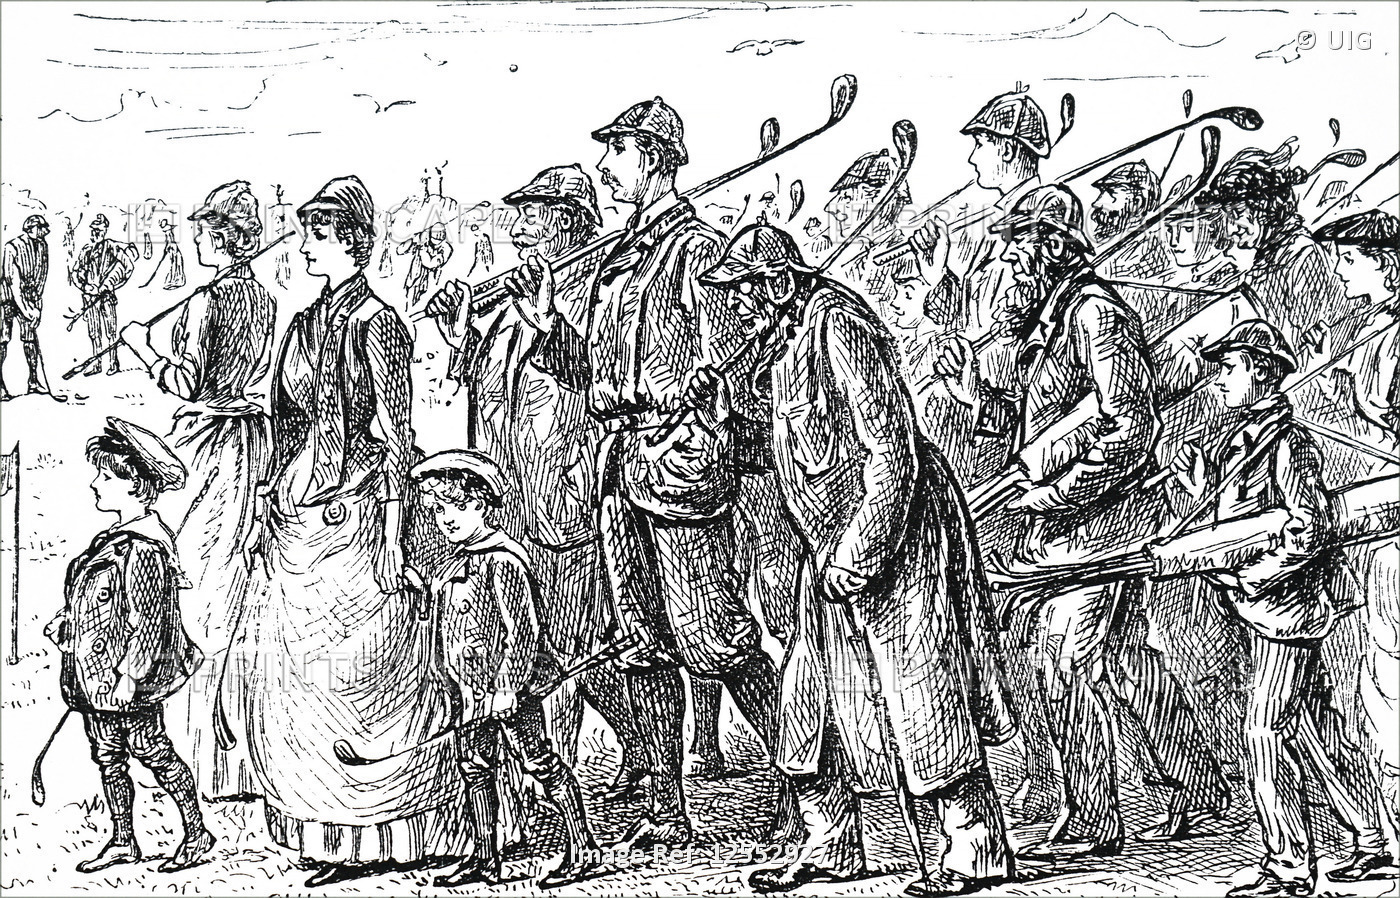 Cartoon commenting on the growing popularity of golf, 19th century